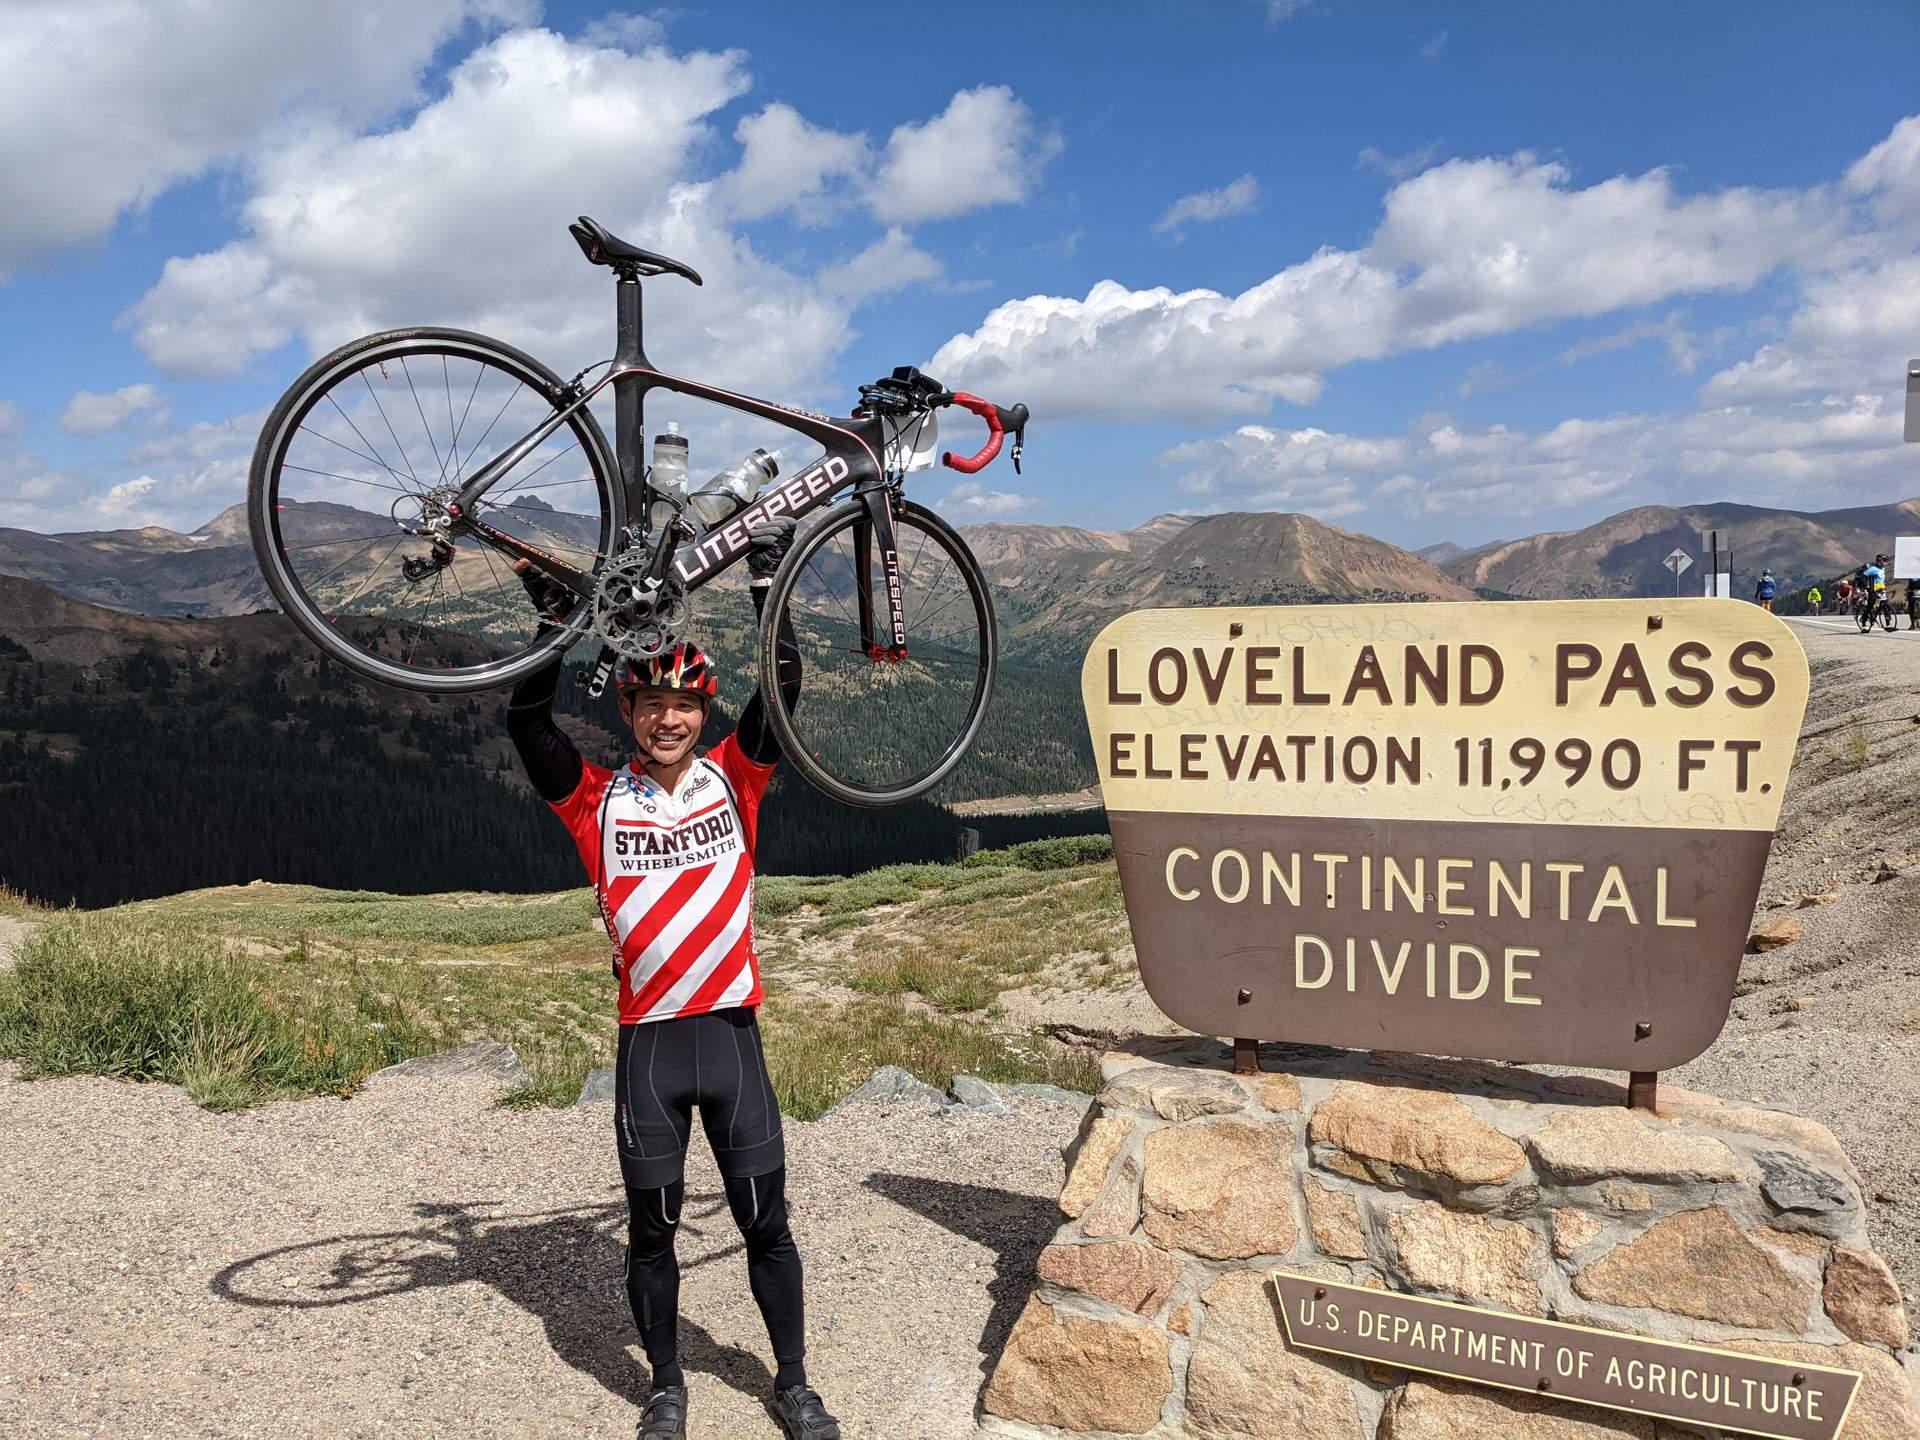 Felix Wong wearing a red and white Stanford jersey lifting his black Litespeed Archon C2 road bike over his head at Loveland Pass, Elevation 11990 feet.